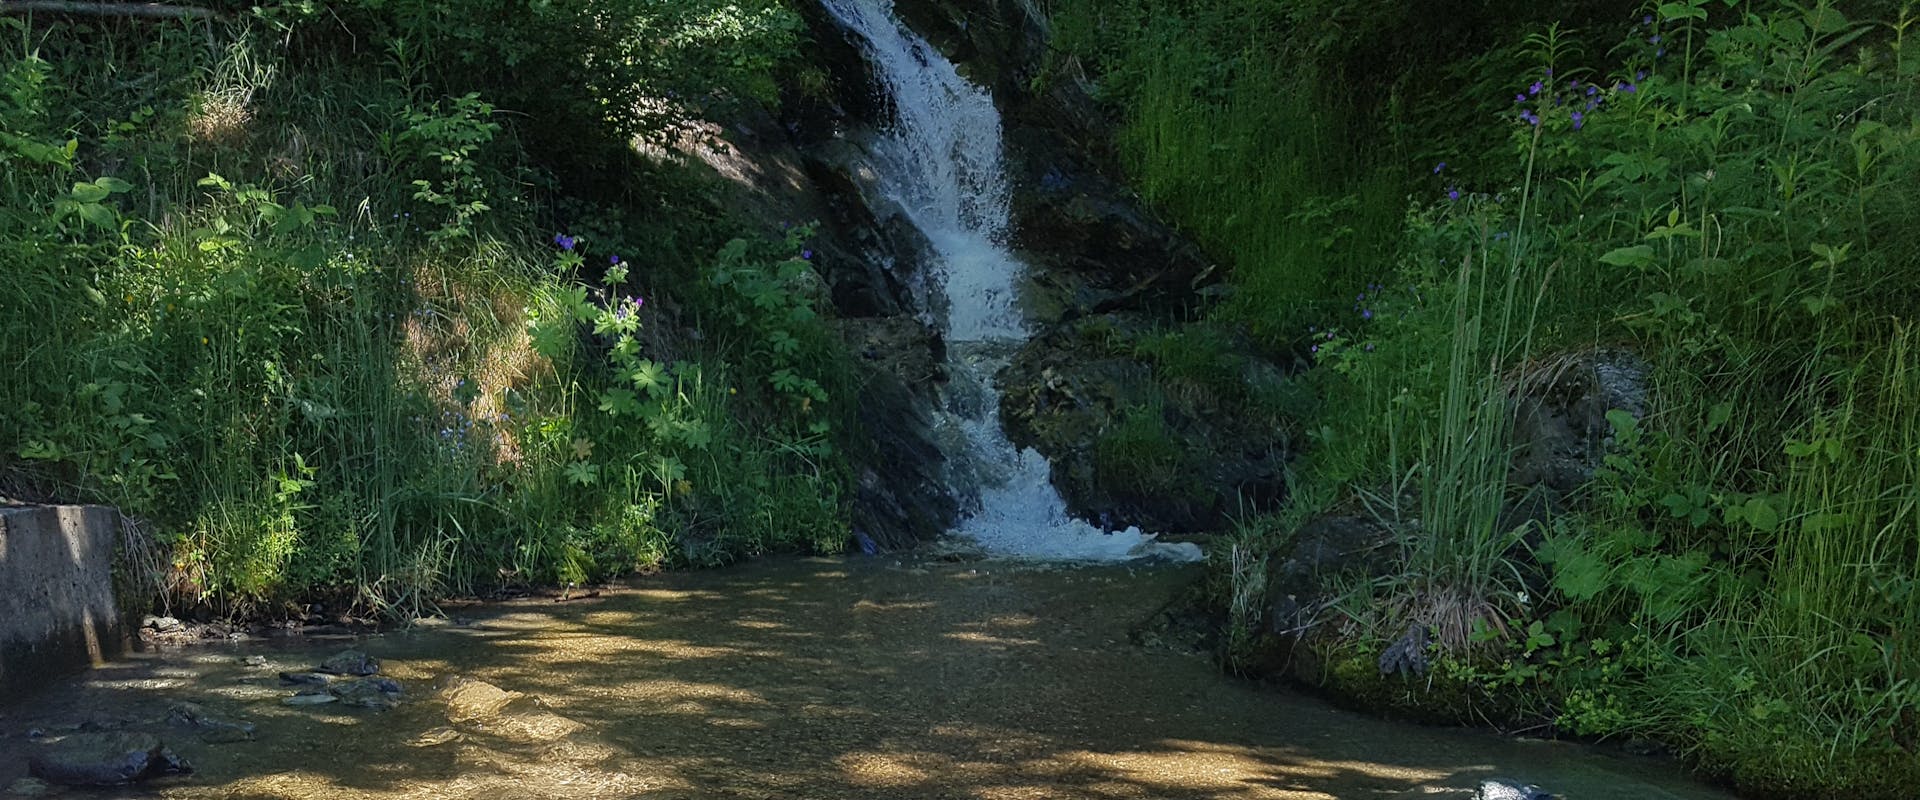 View on a waterfall in mountain area